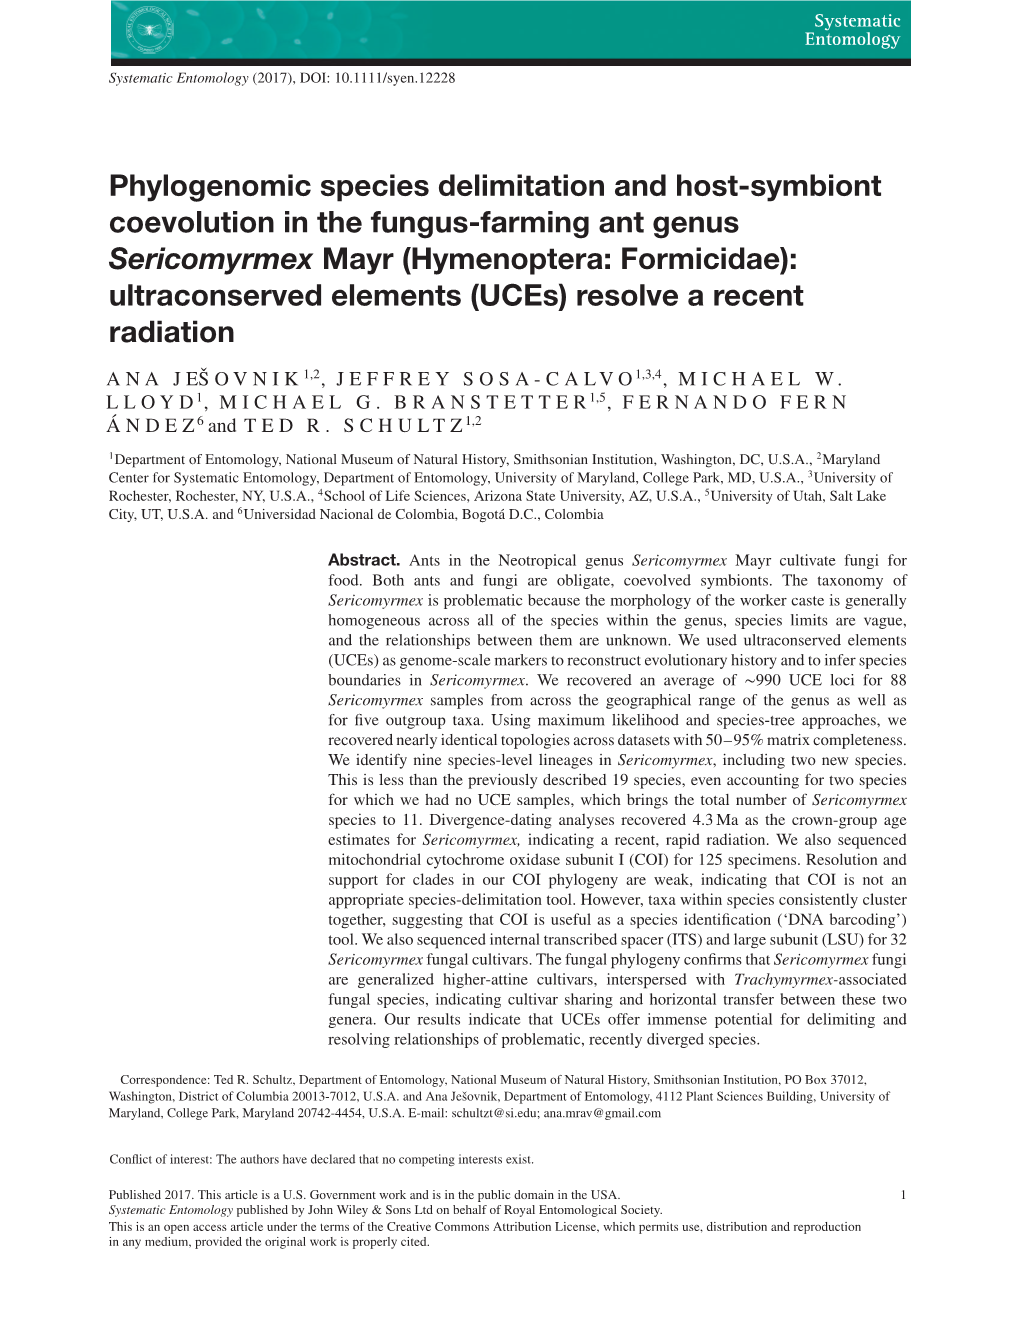 Phylogenomic Species Delimitation and Host-Symbiont